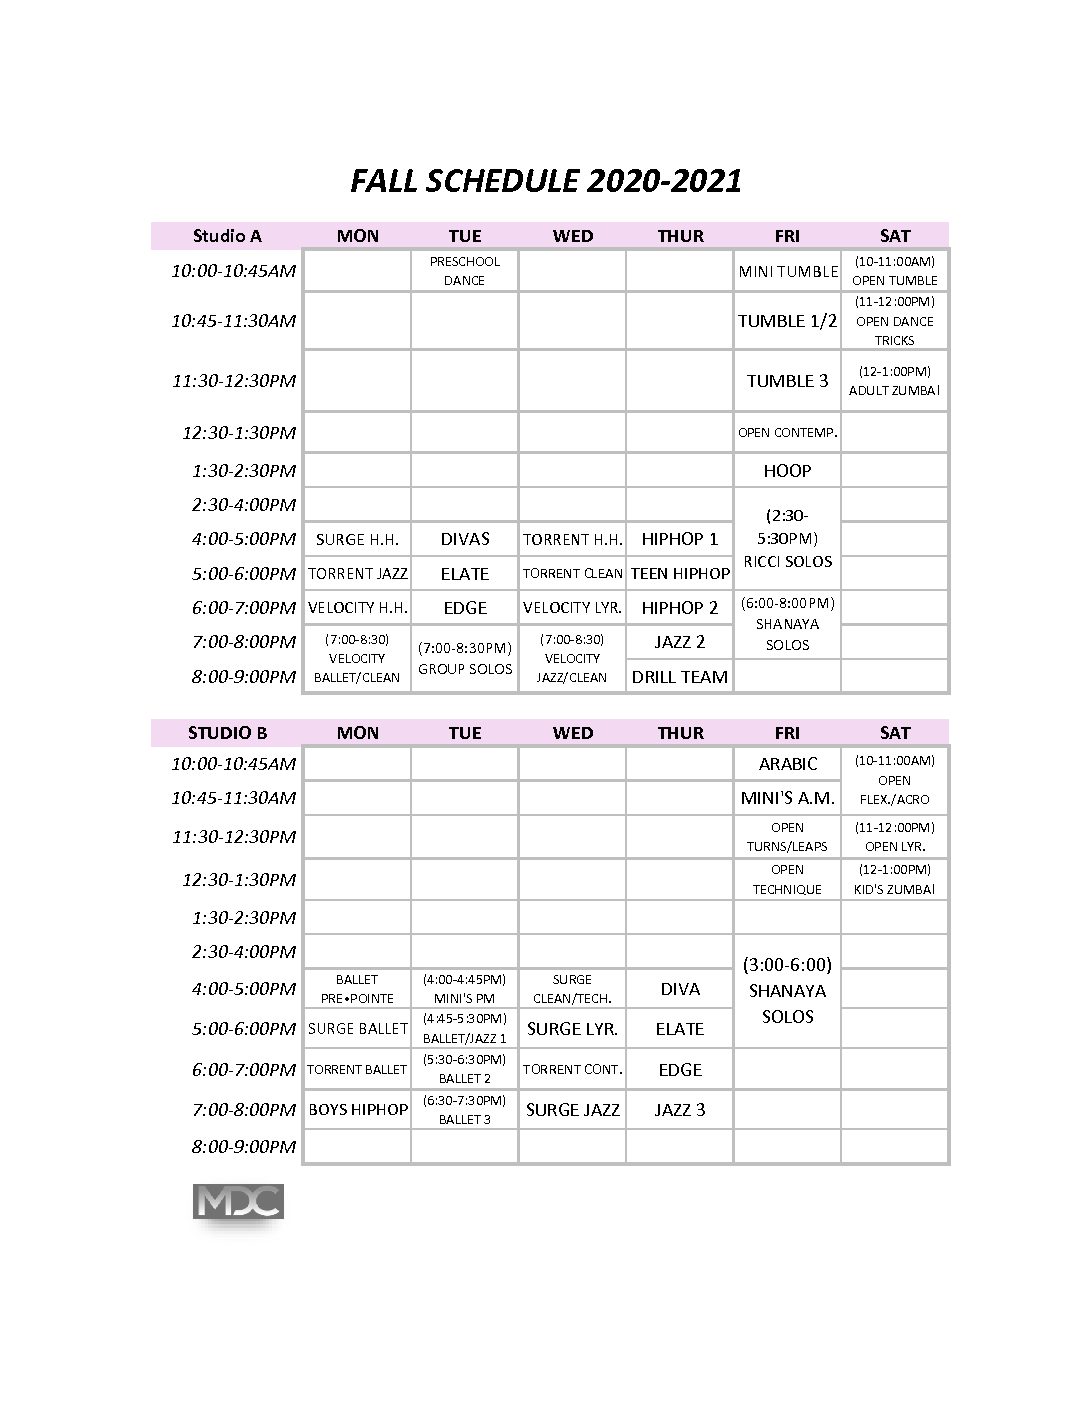 DANCE is back! Fall dance classes start today at MDC